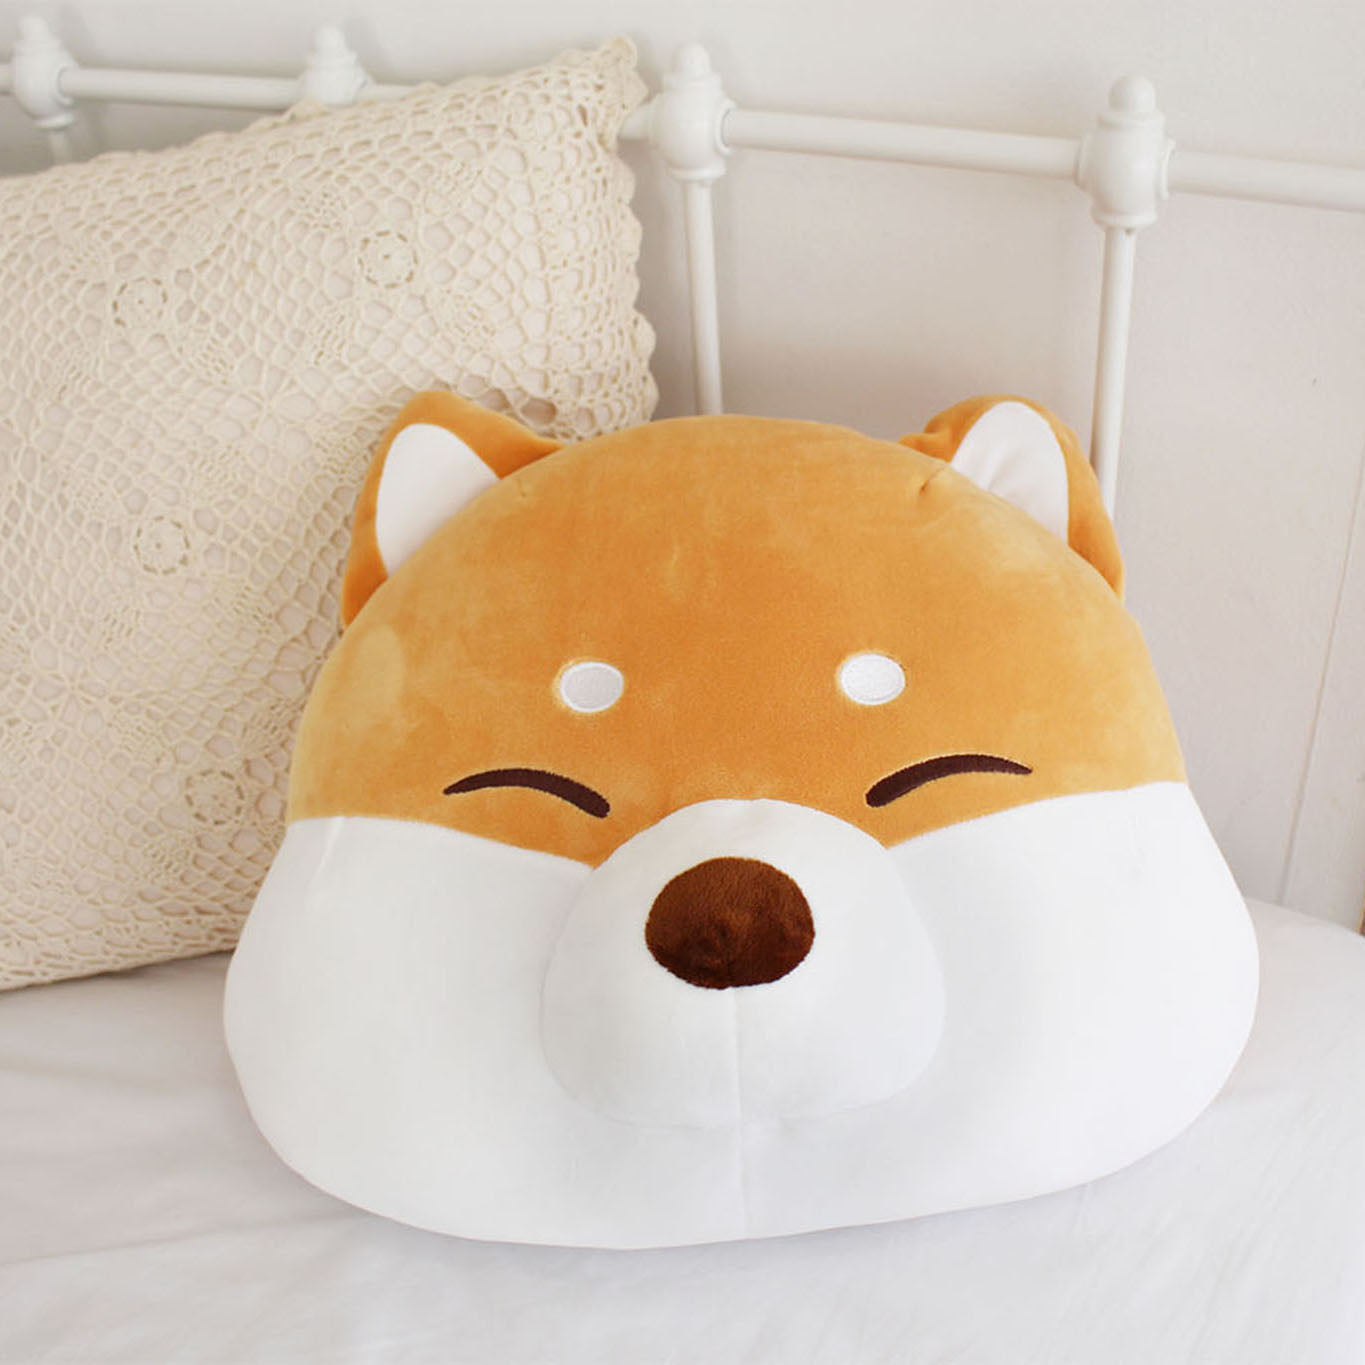 Shiba face cushion sits on a white iron frame bed with square white crochet pillow.